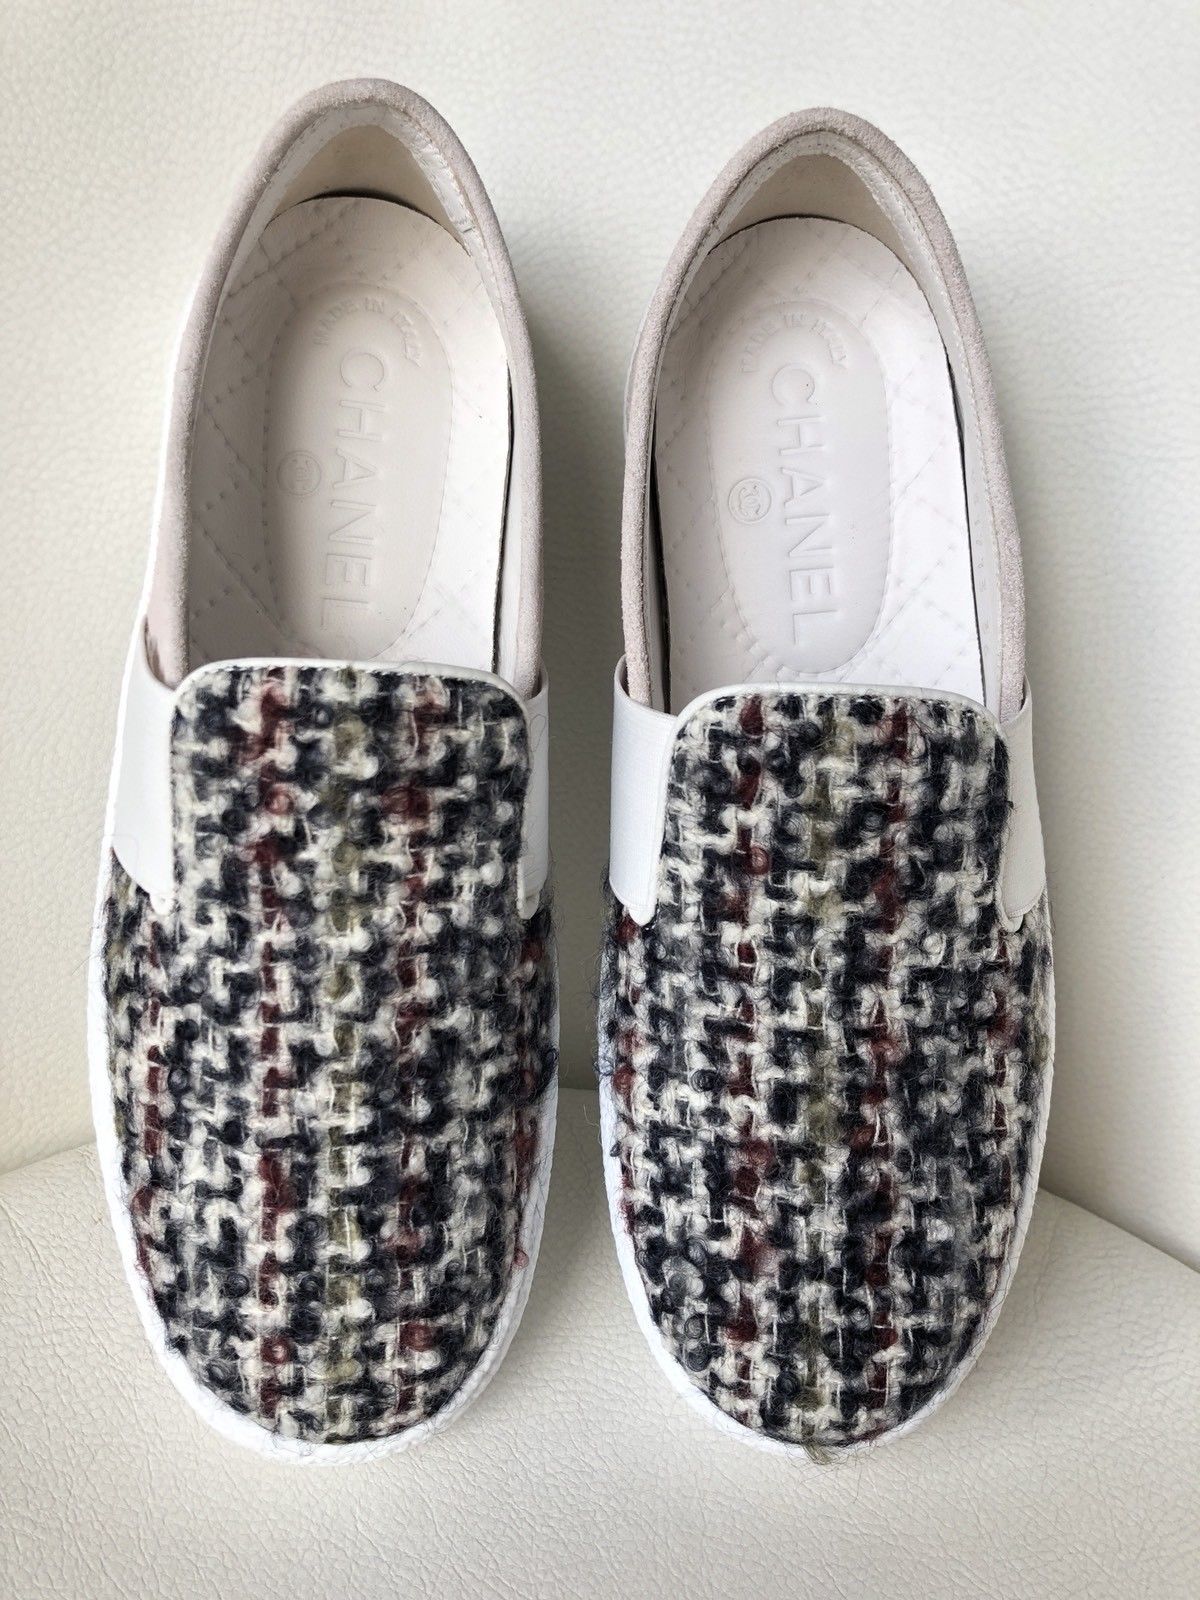 CHANEL PLAID TWEED SUEDE GREY SLIP ON LOAFERS MOCCASIN SHOES – Miami Lux  Boutique